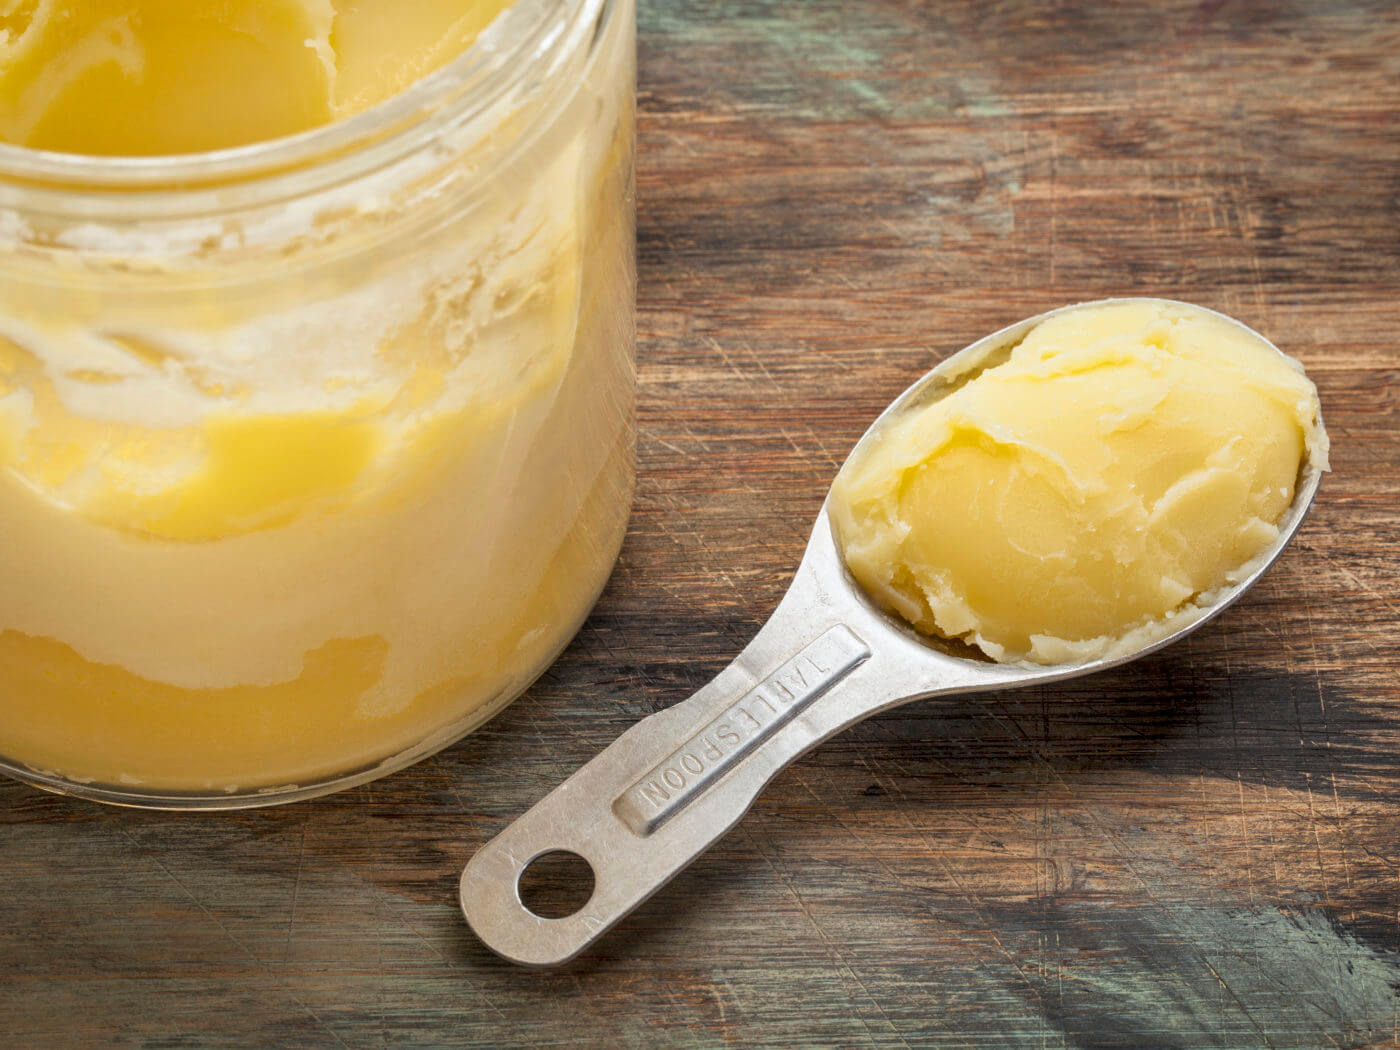 jar and measuring tablespoon of ghee - clarified butter on grunge wood